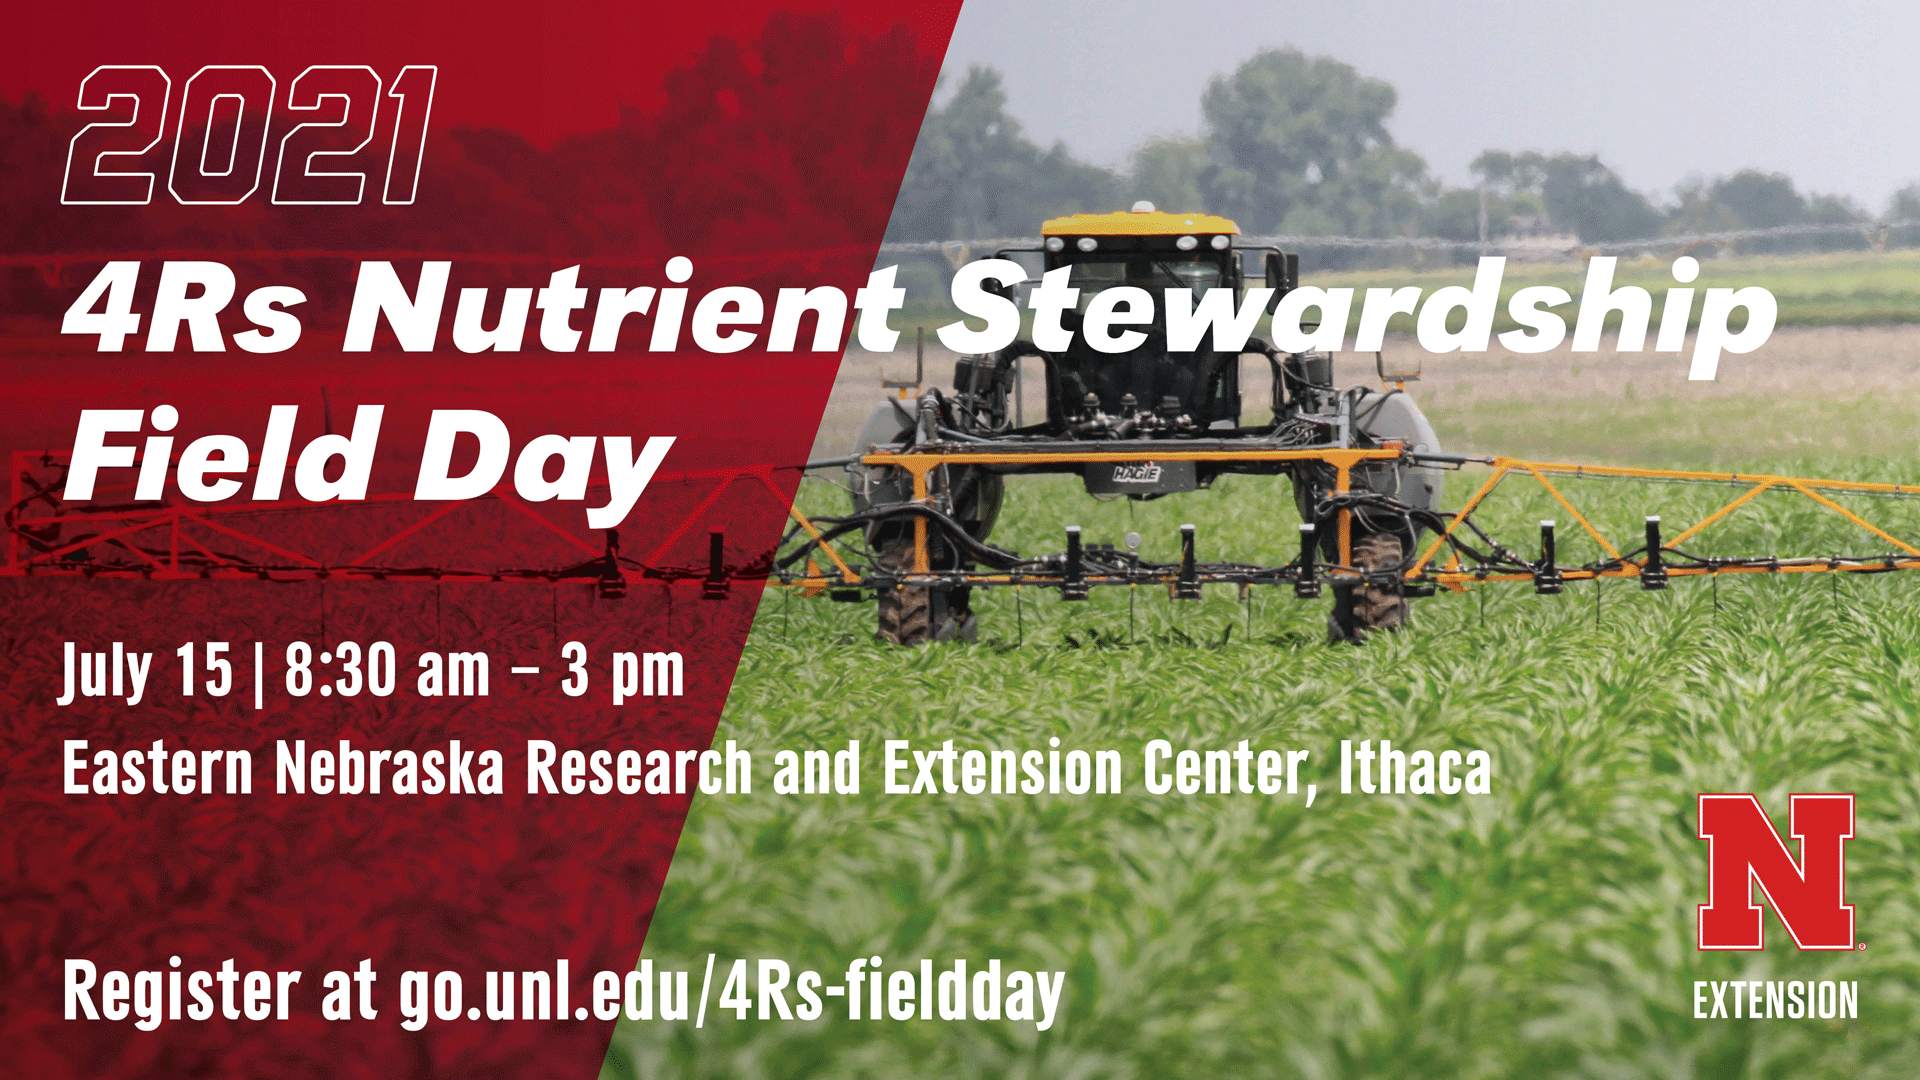 The University of Nebraska–Lincoln and Nebraska Extension is excited to offer the first annual 4Rs Nutrient Stewardship Field Day on July 15 at the Eastern Nebraska Research and Extension Center.